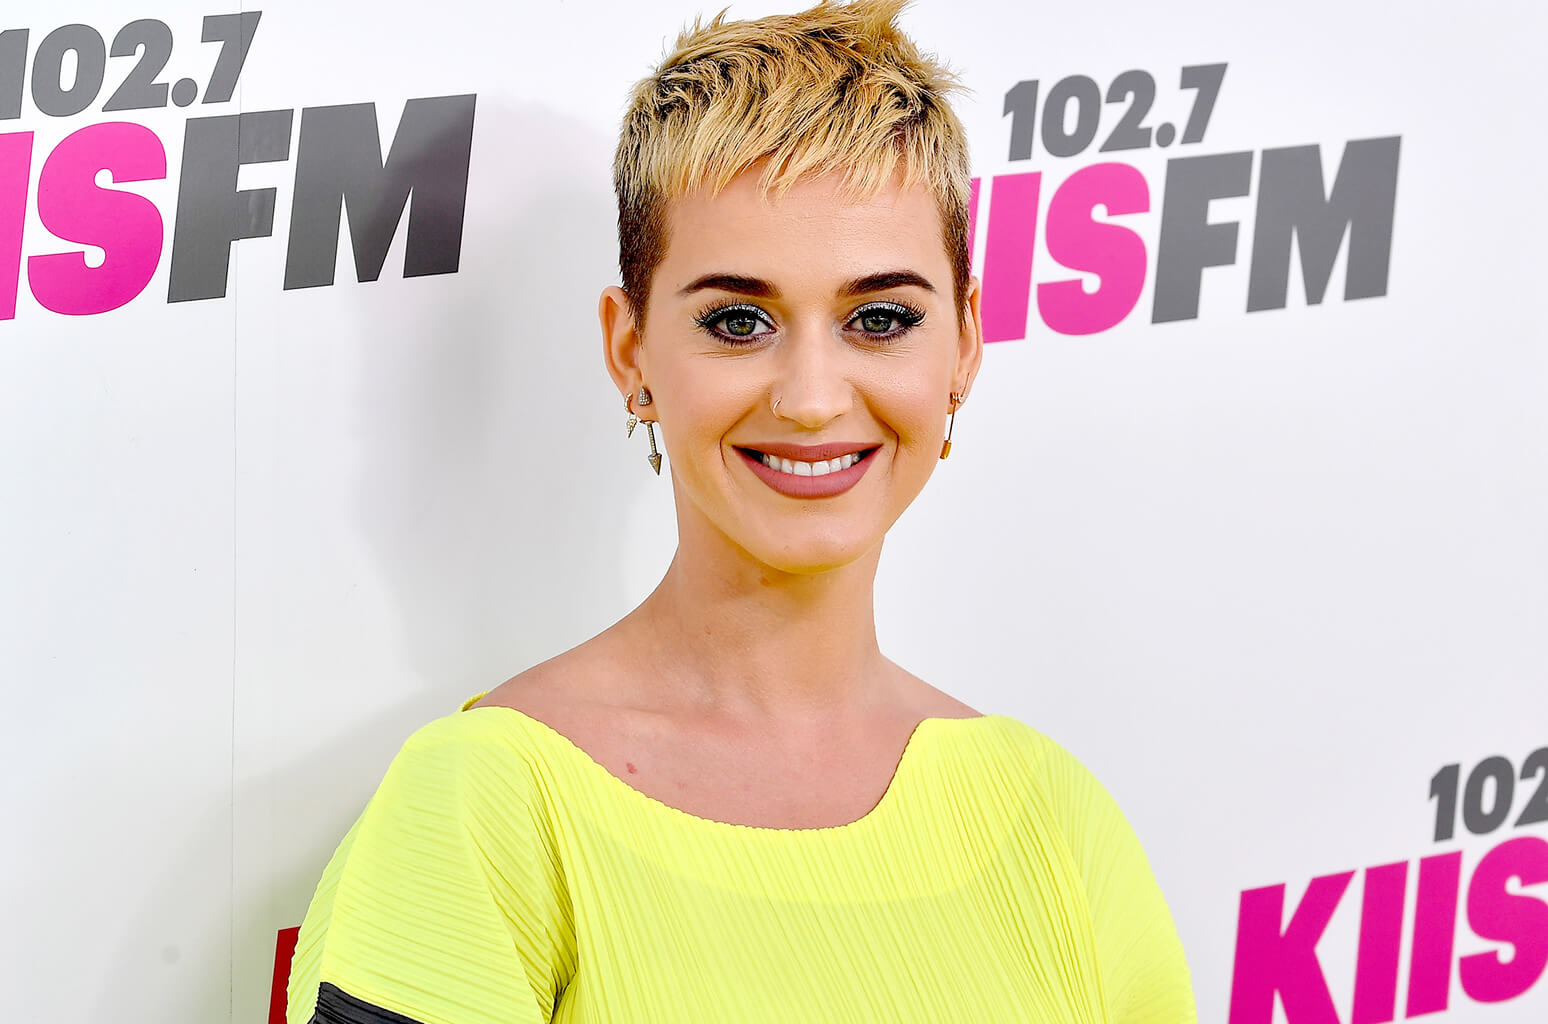 Katy Perry Steals Beats From Christian Artists Tango smile